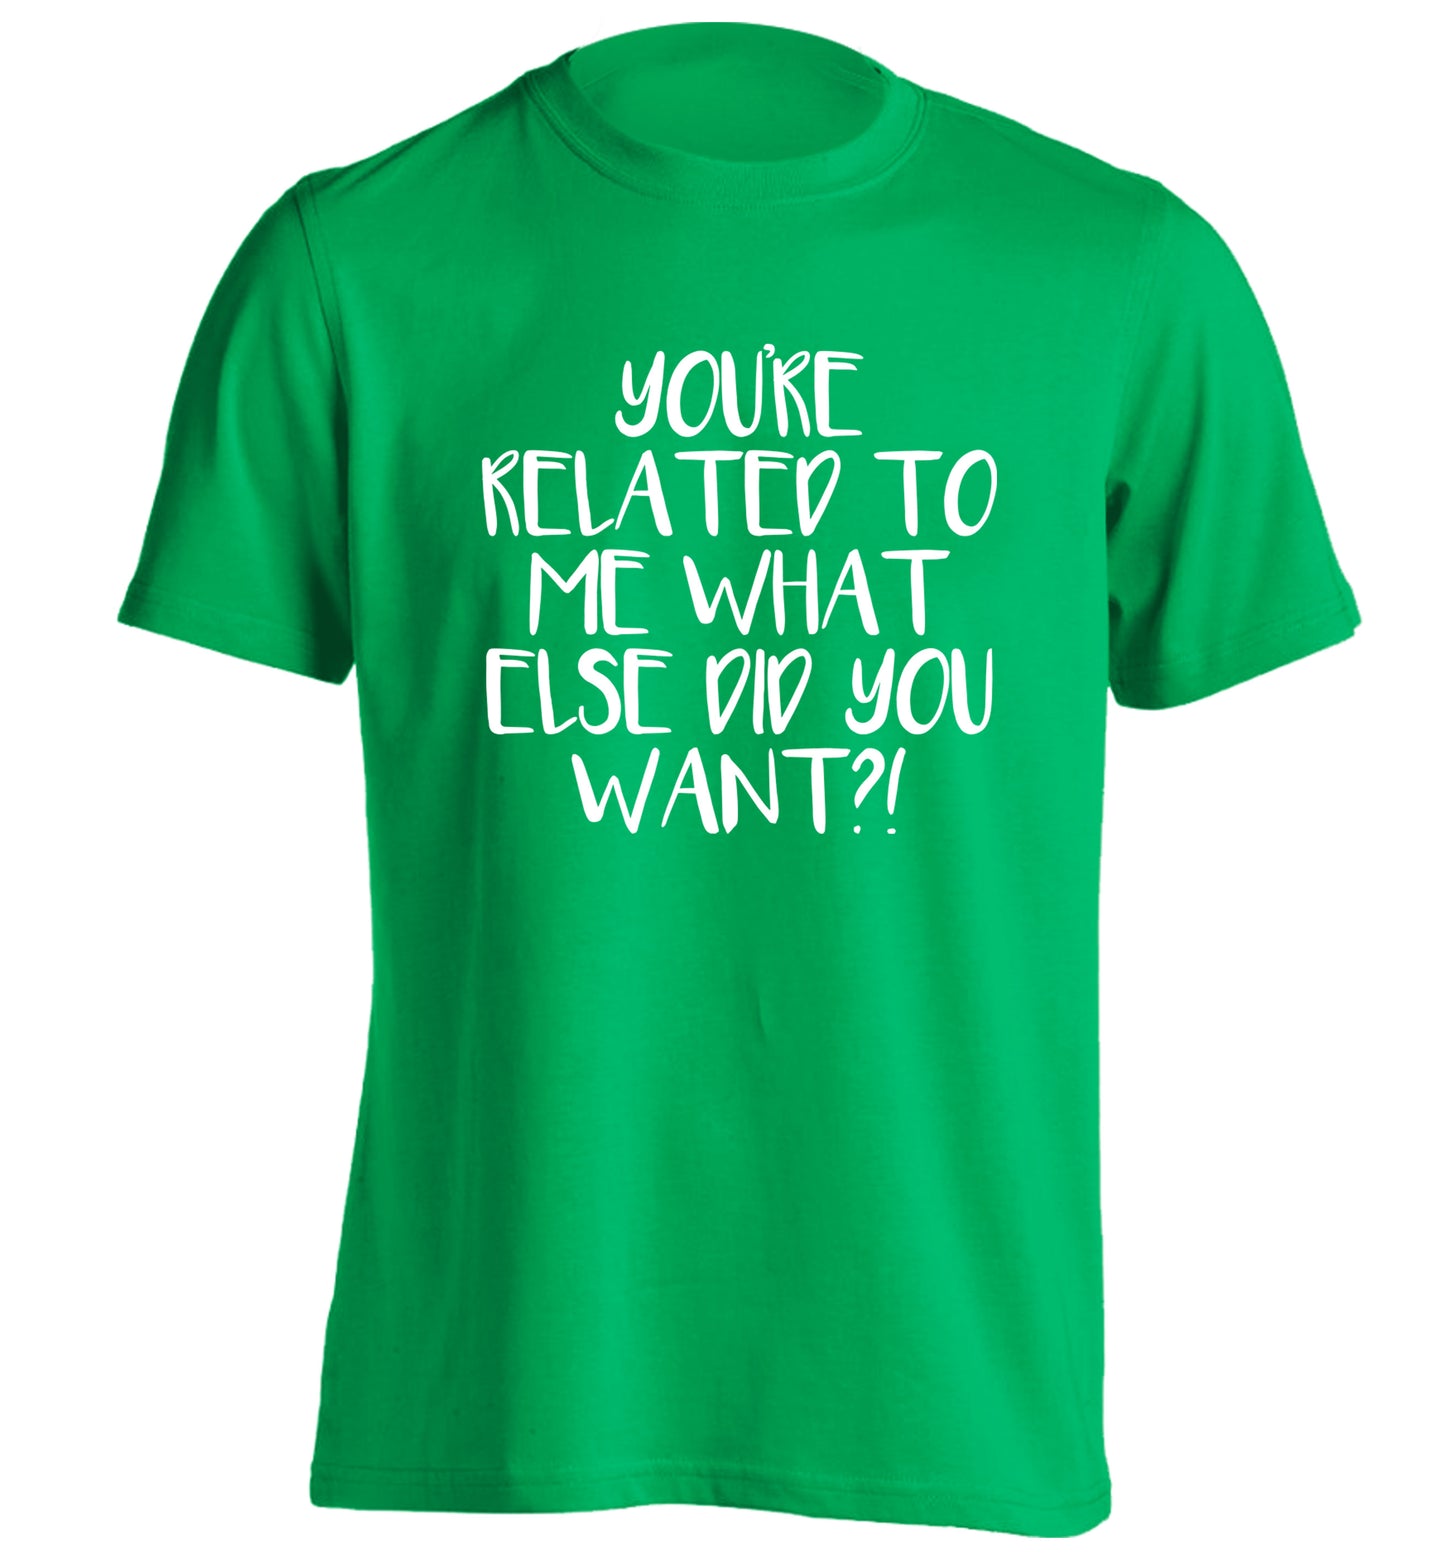 You're related to me what more do you want? adults unisex green Tshirt 2XL